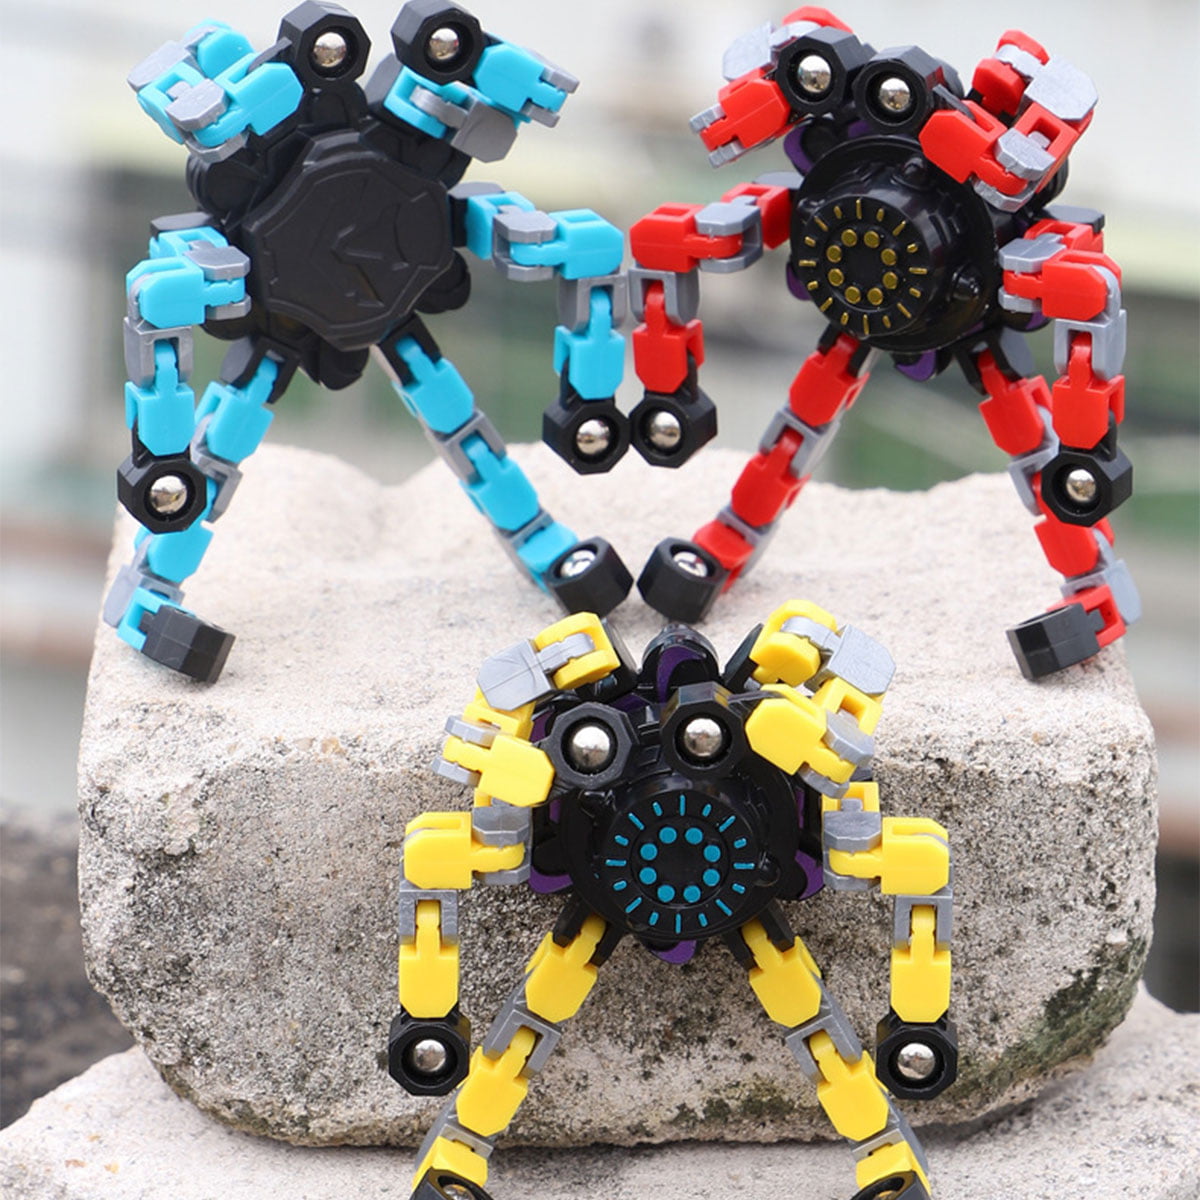 Fingertip Toys Transformable Chain Fingertip Gyro DIY Deformable Robot Toy Mechanical Spiral Twister Stress Relief Focus Toy Decompression Finger Tops Toy for Kids Adults 